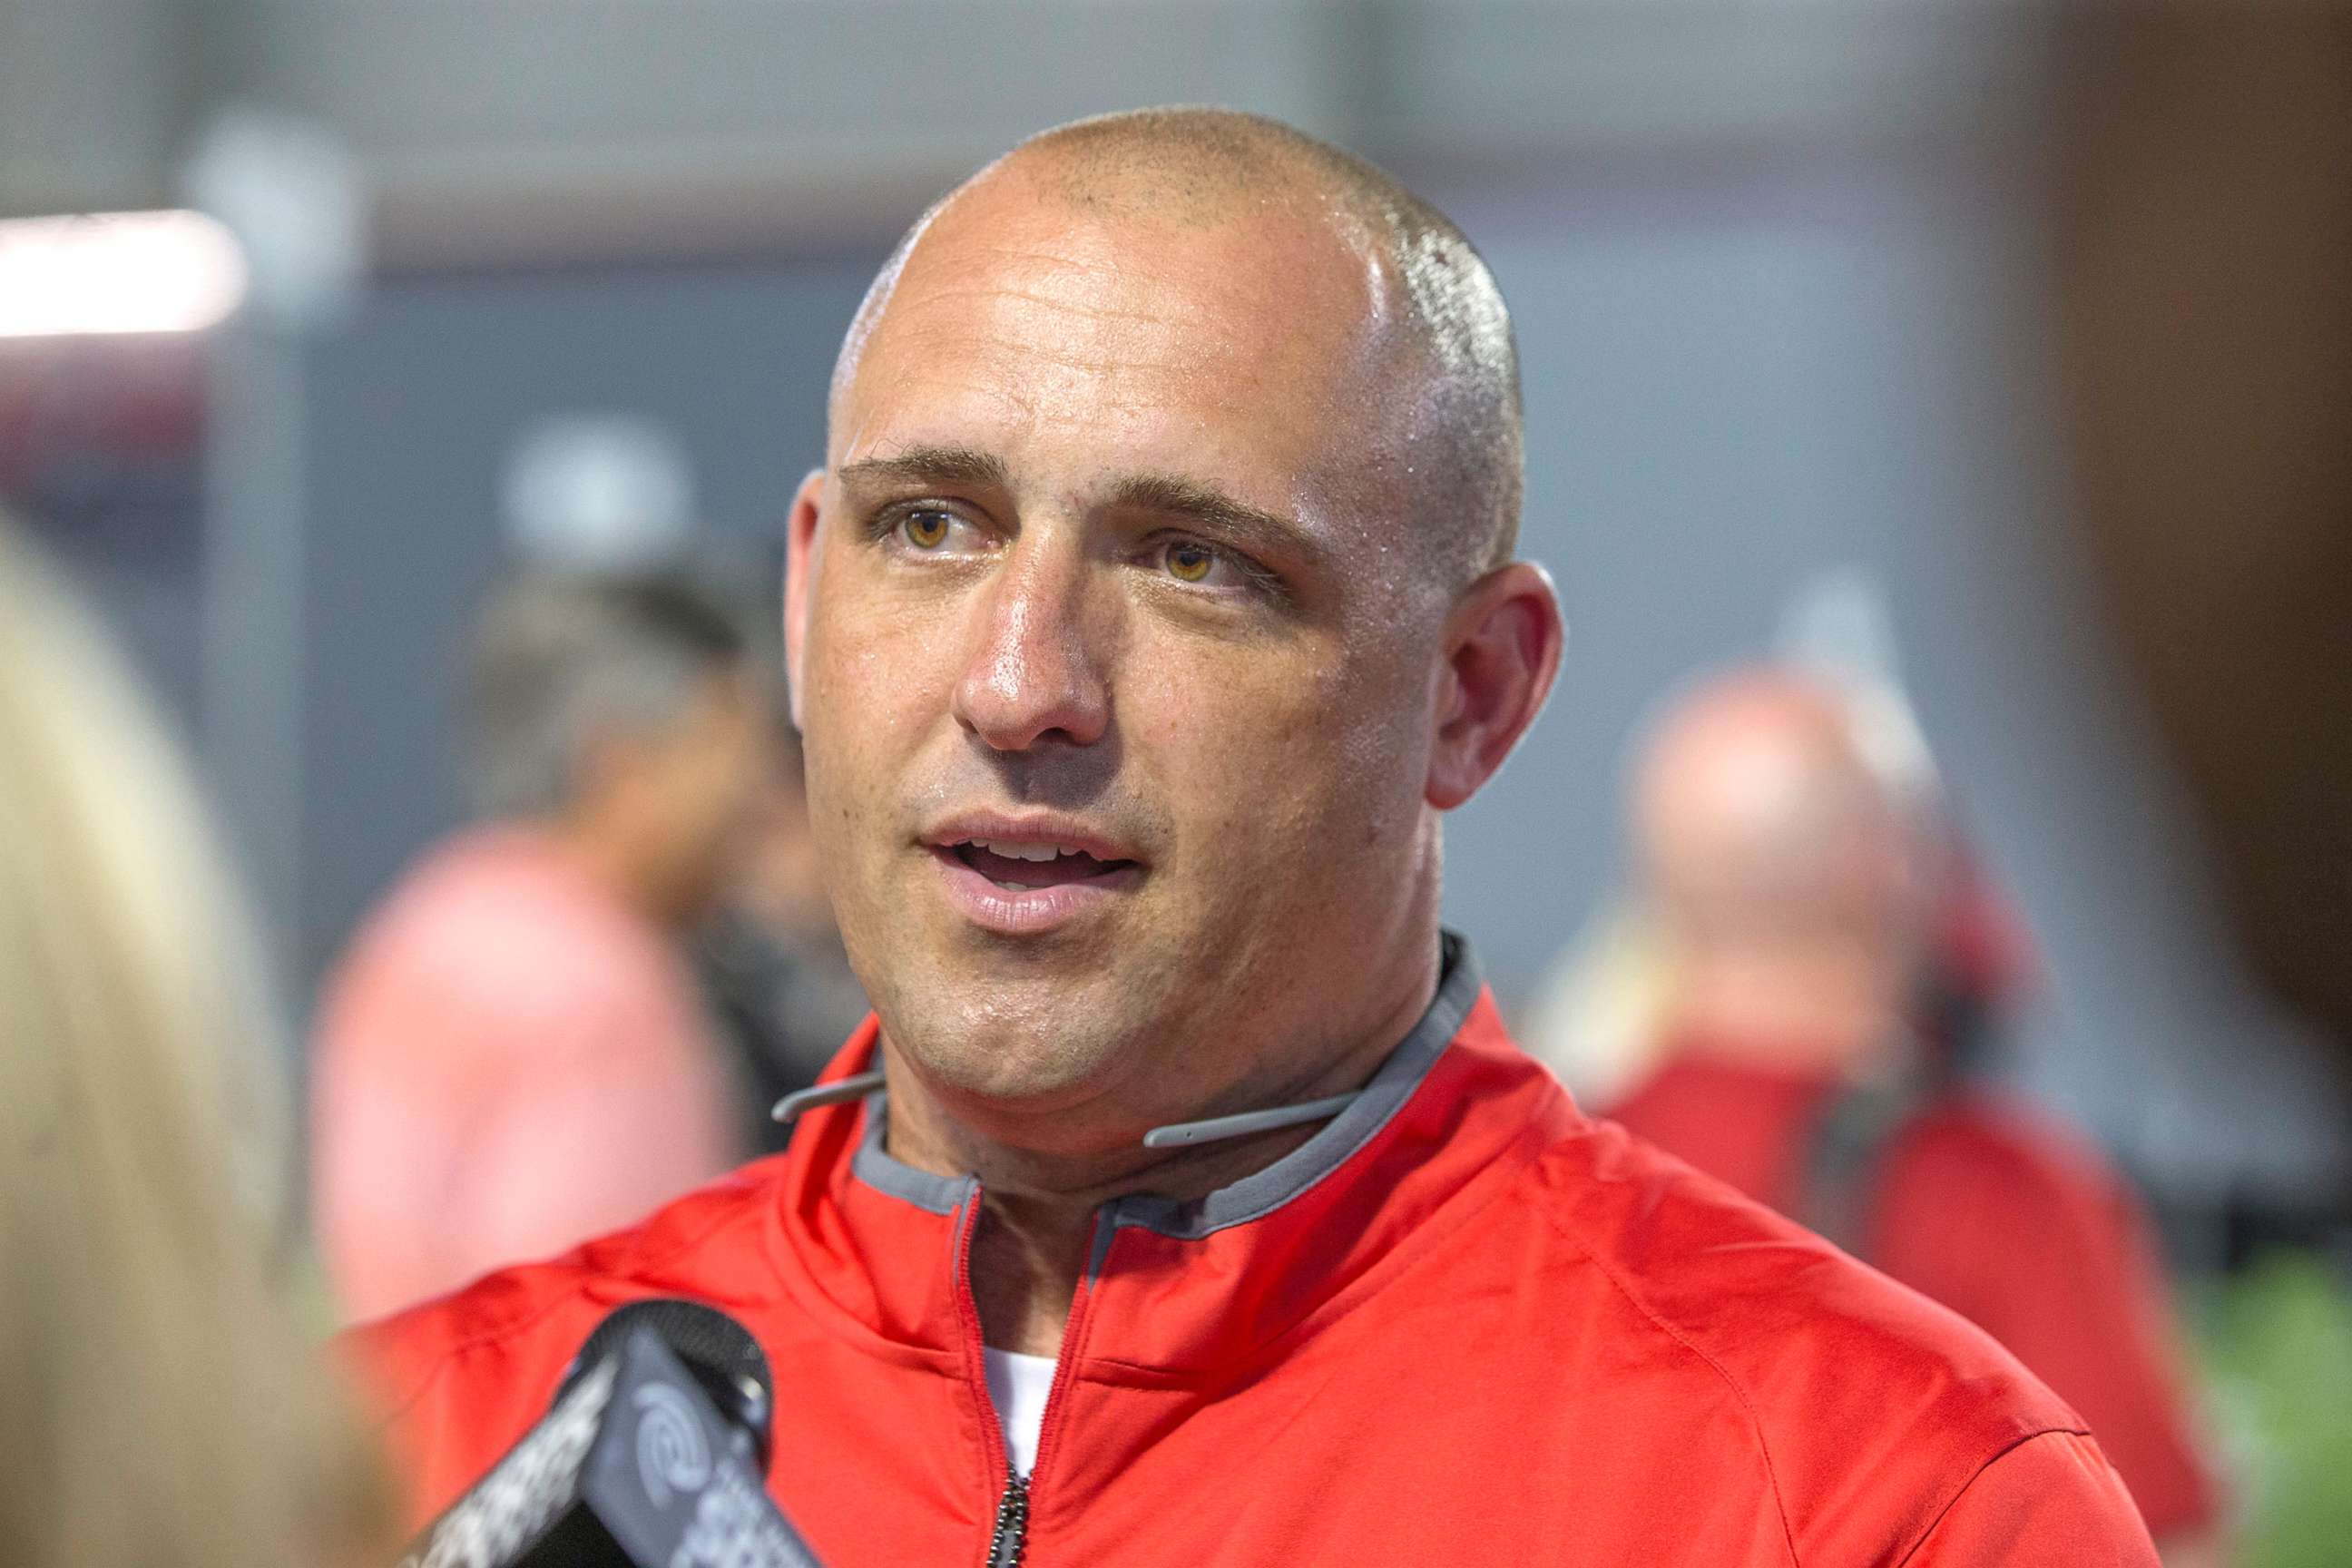 PHOTO: Coach Zach Smith talking to the media during the Ohio State Football Media Day at the Woody Hayes Athletic Center in Columbus, Ohio, Aug. 16, 2015.